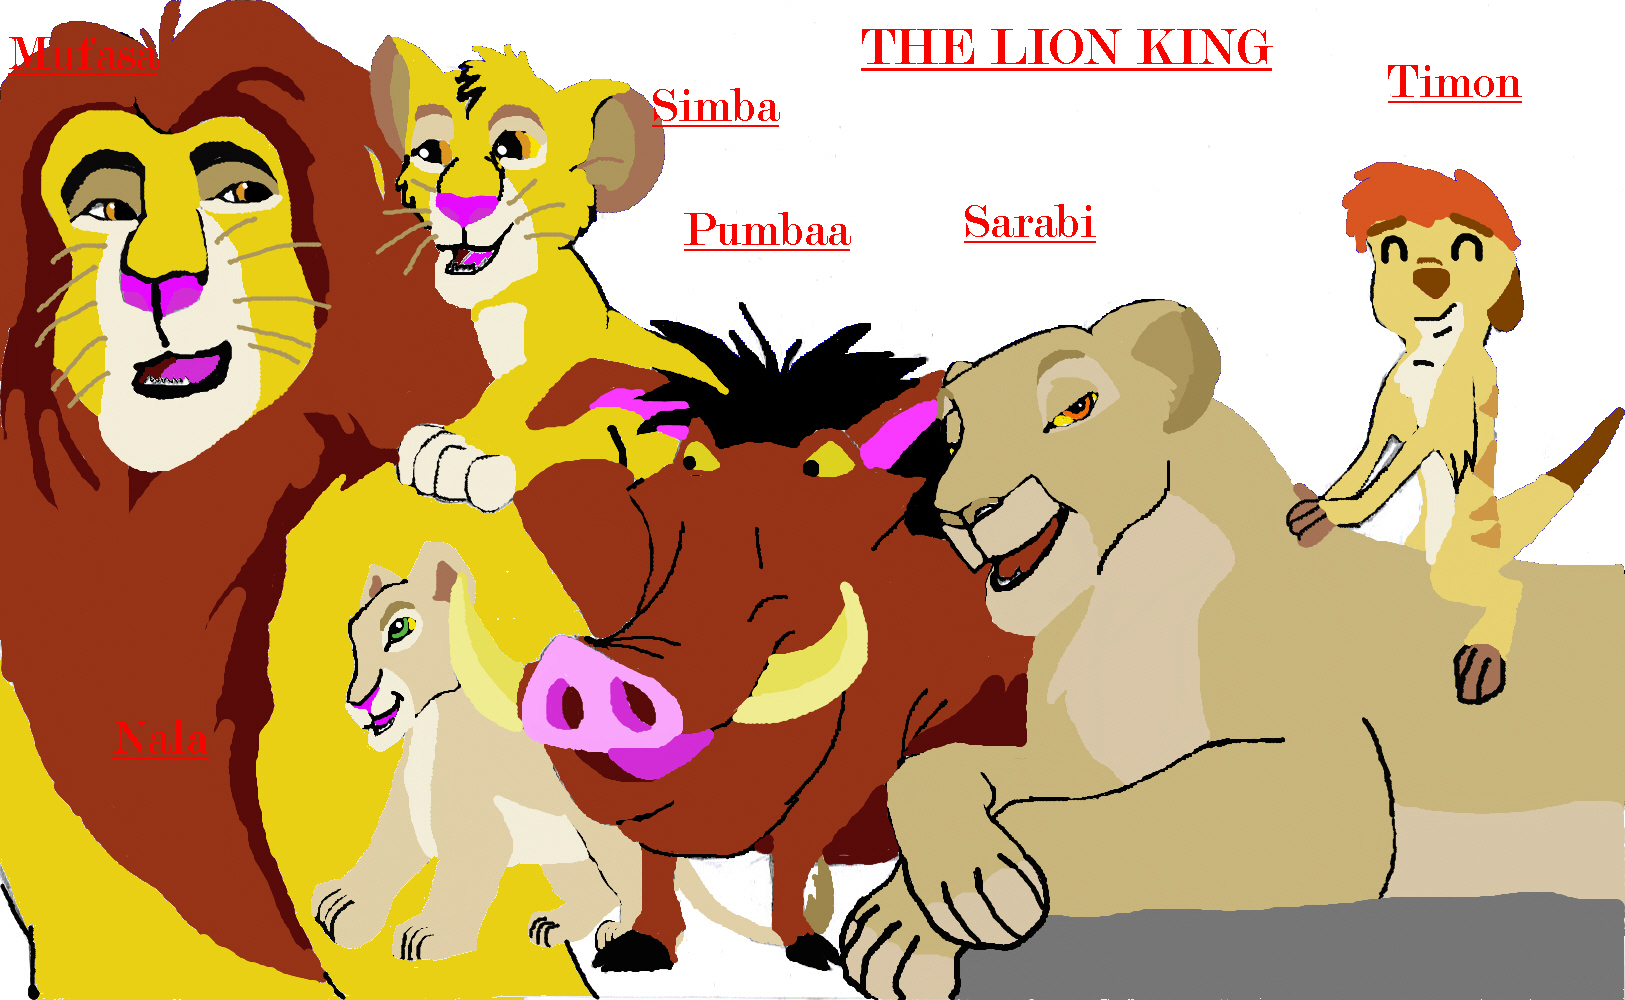 The Lion King-Request for Drakengardfan by Yami_And_The_Fallen_Angel